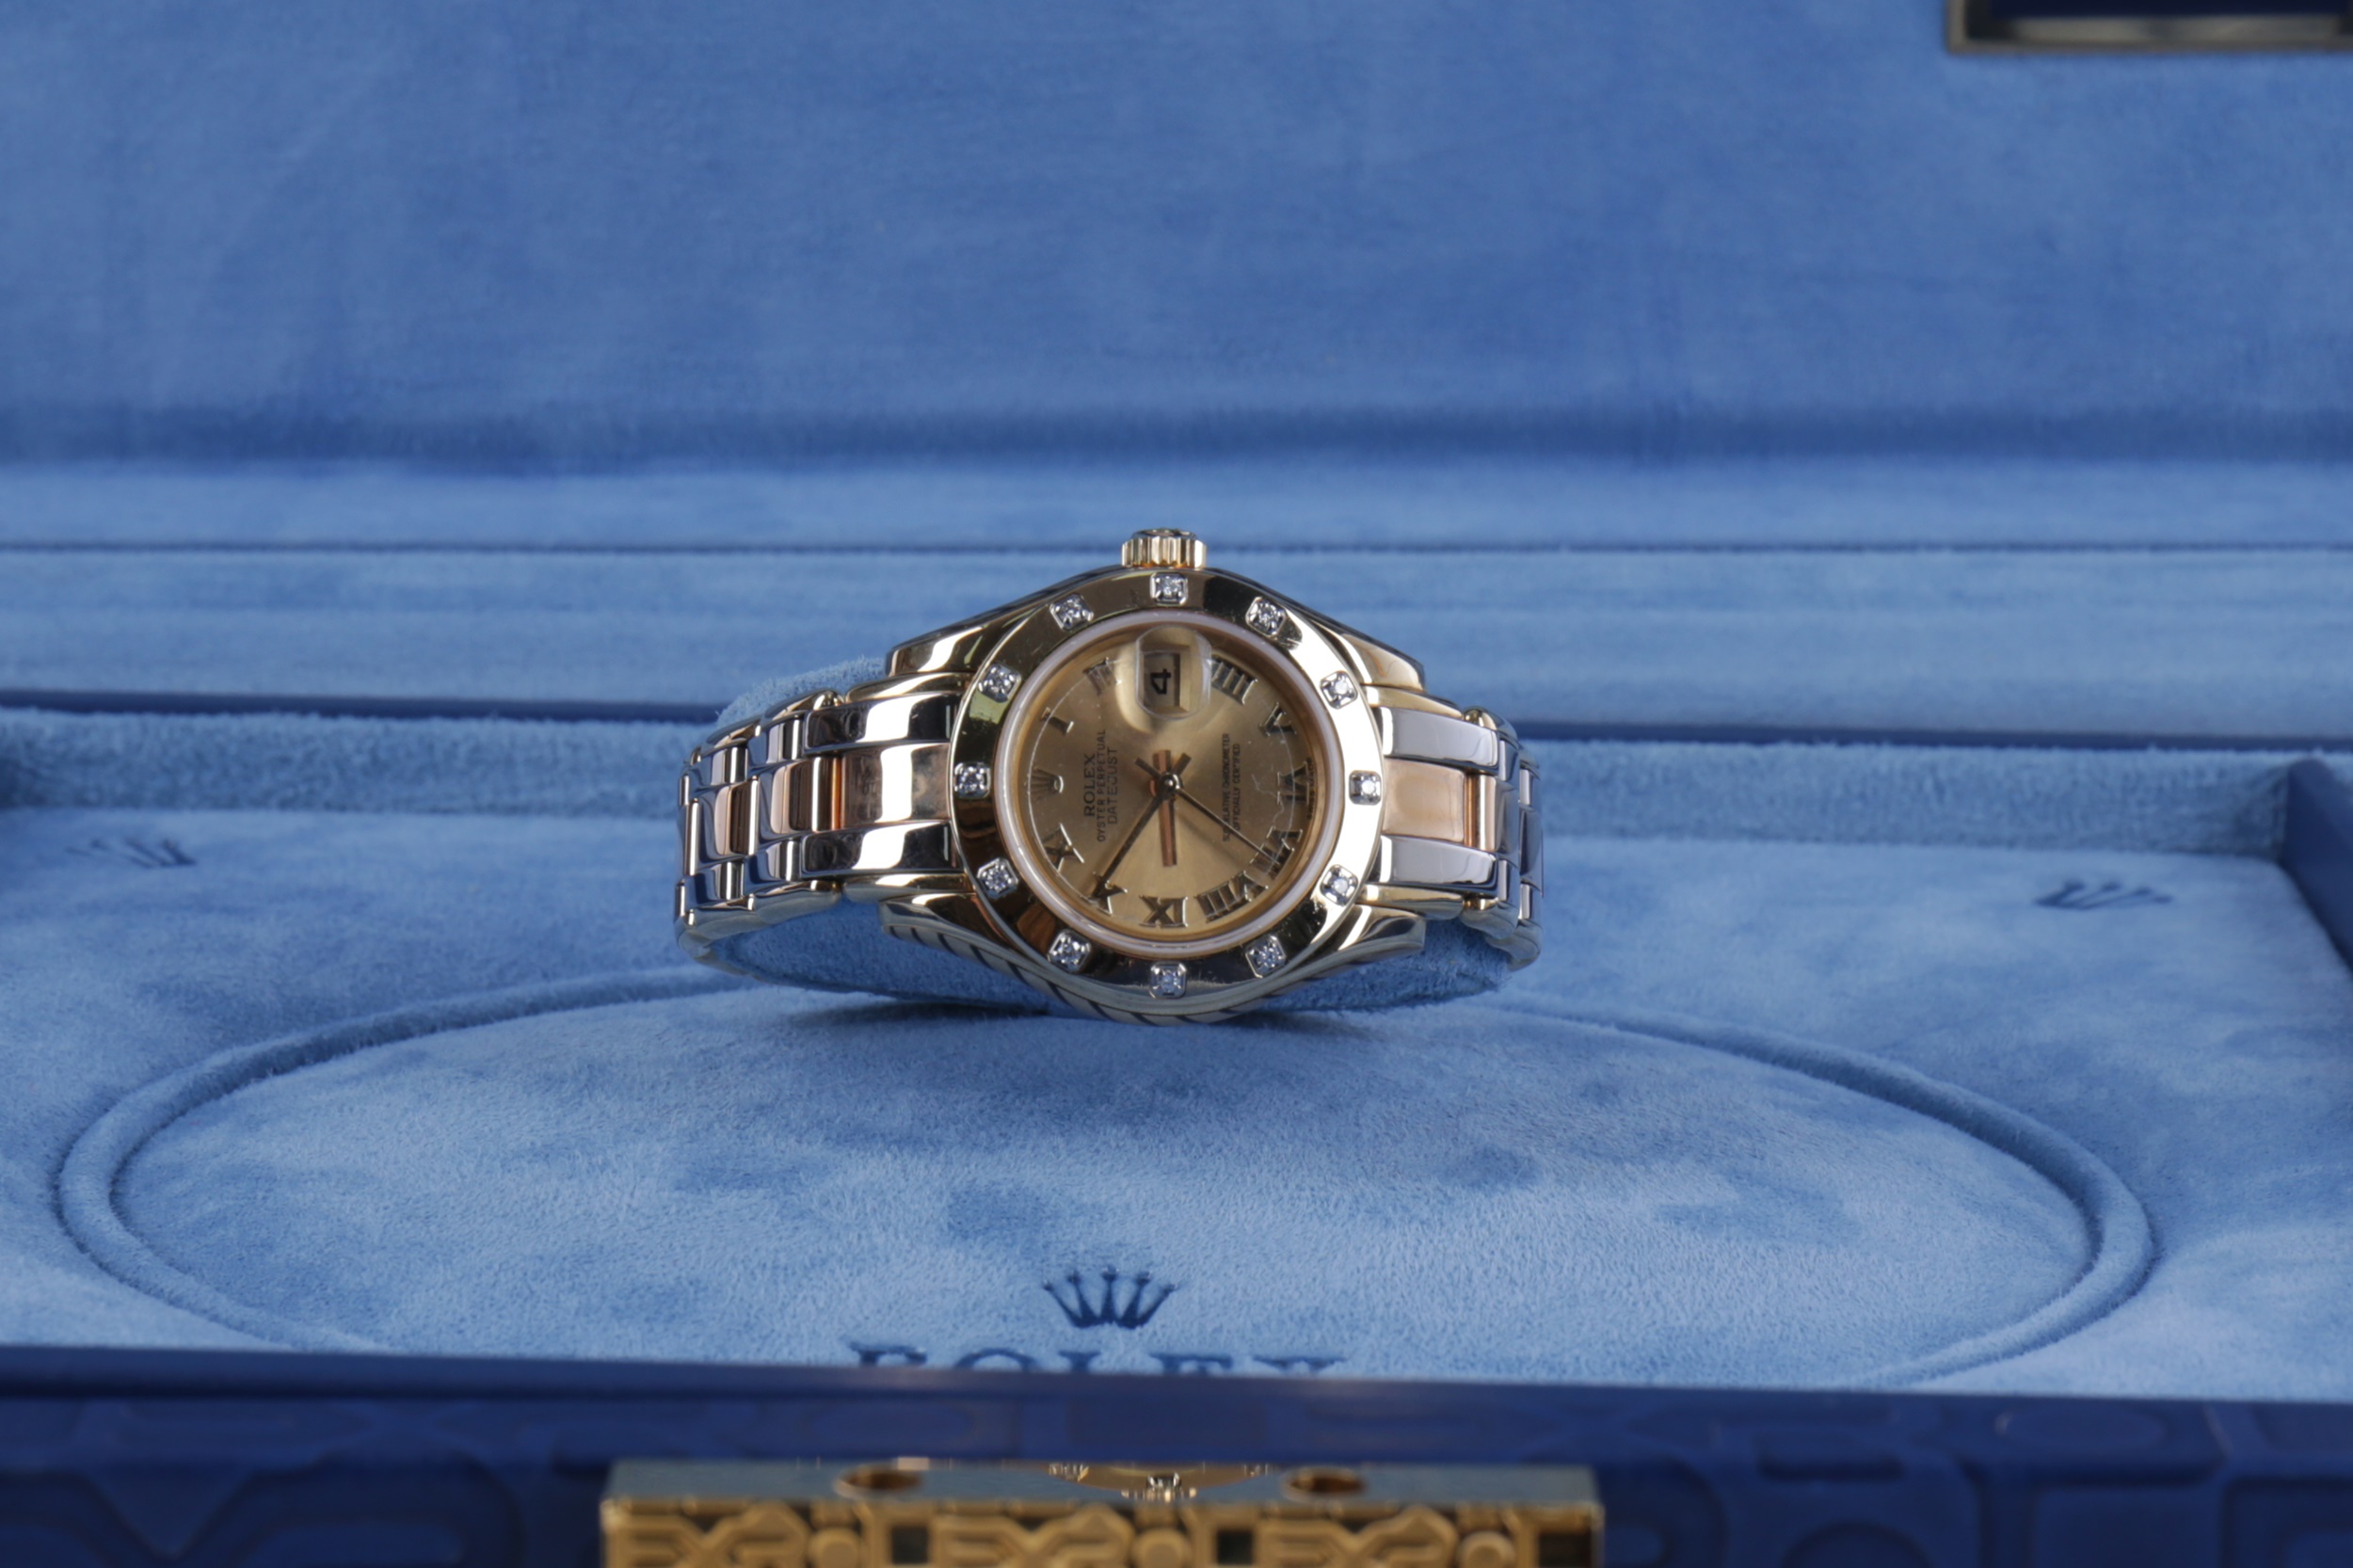 A LADY'S ROLEX DIAMOND SET PEARLMASTER TRIDOR EIGHTEEN CARAT GOLD AUTOMATIC WRIST WATCH - Image 2 of 2